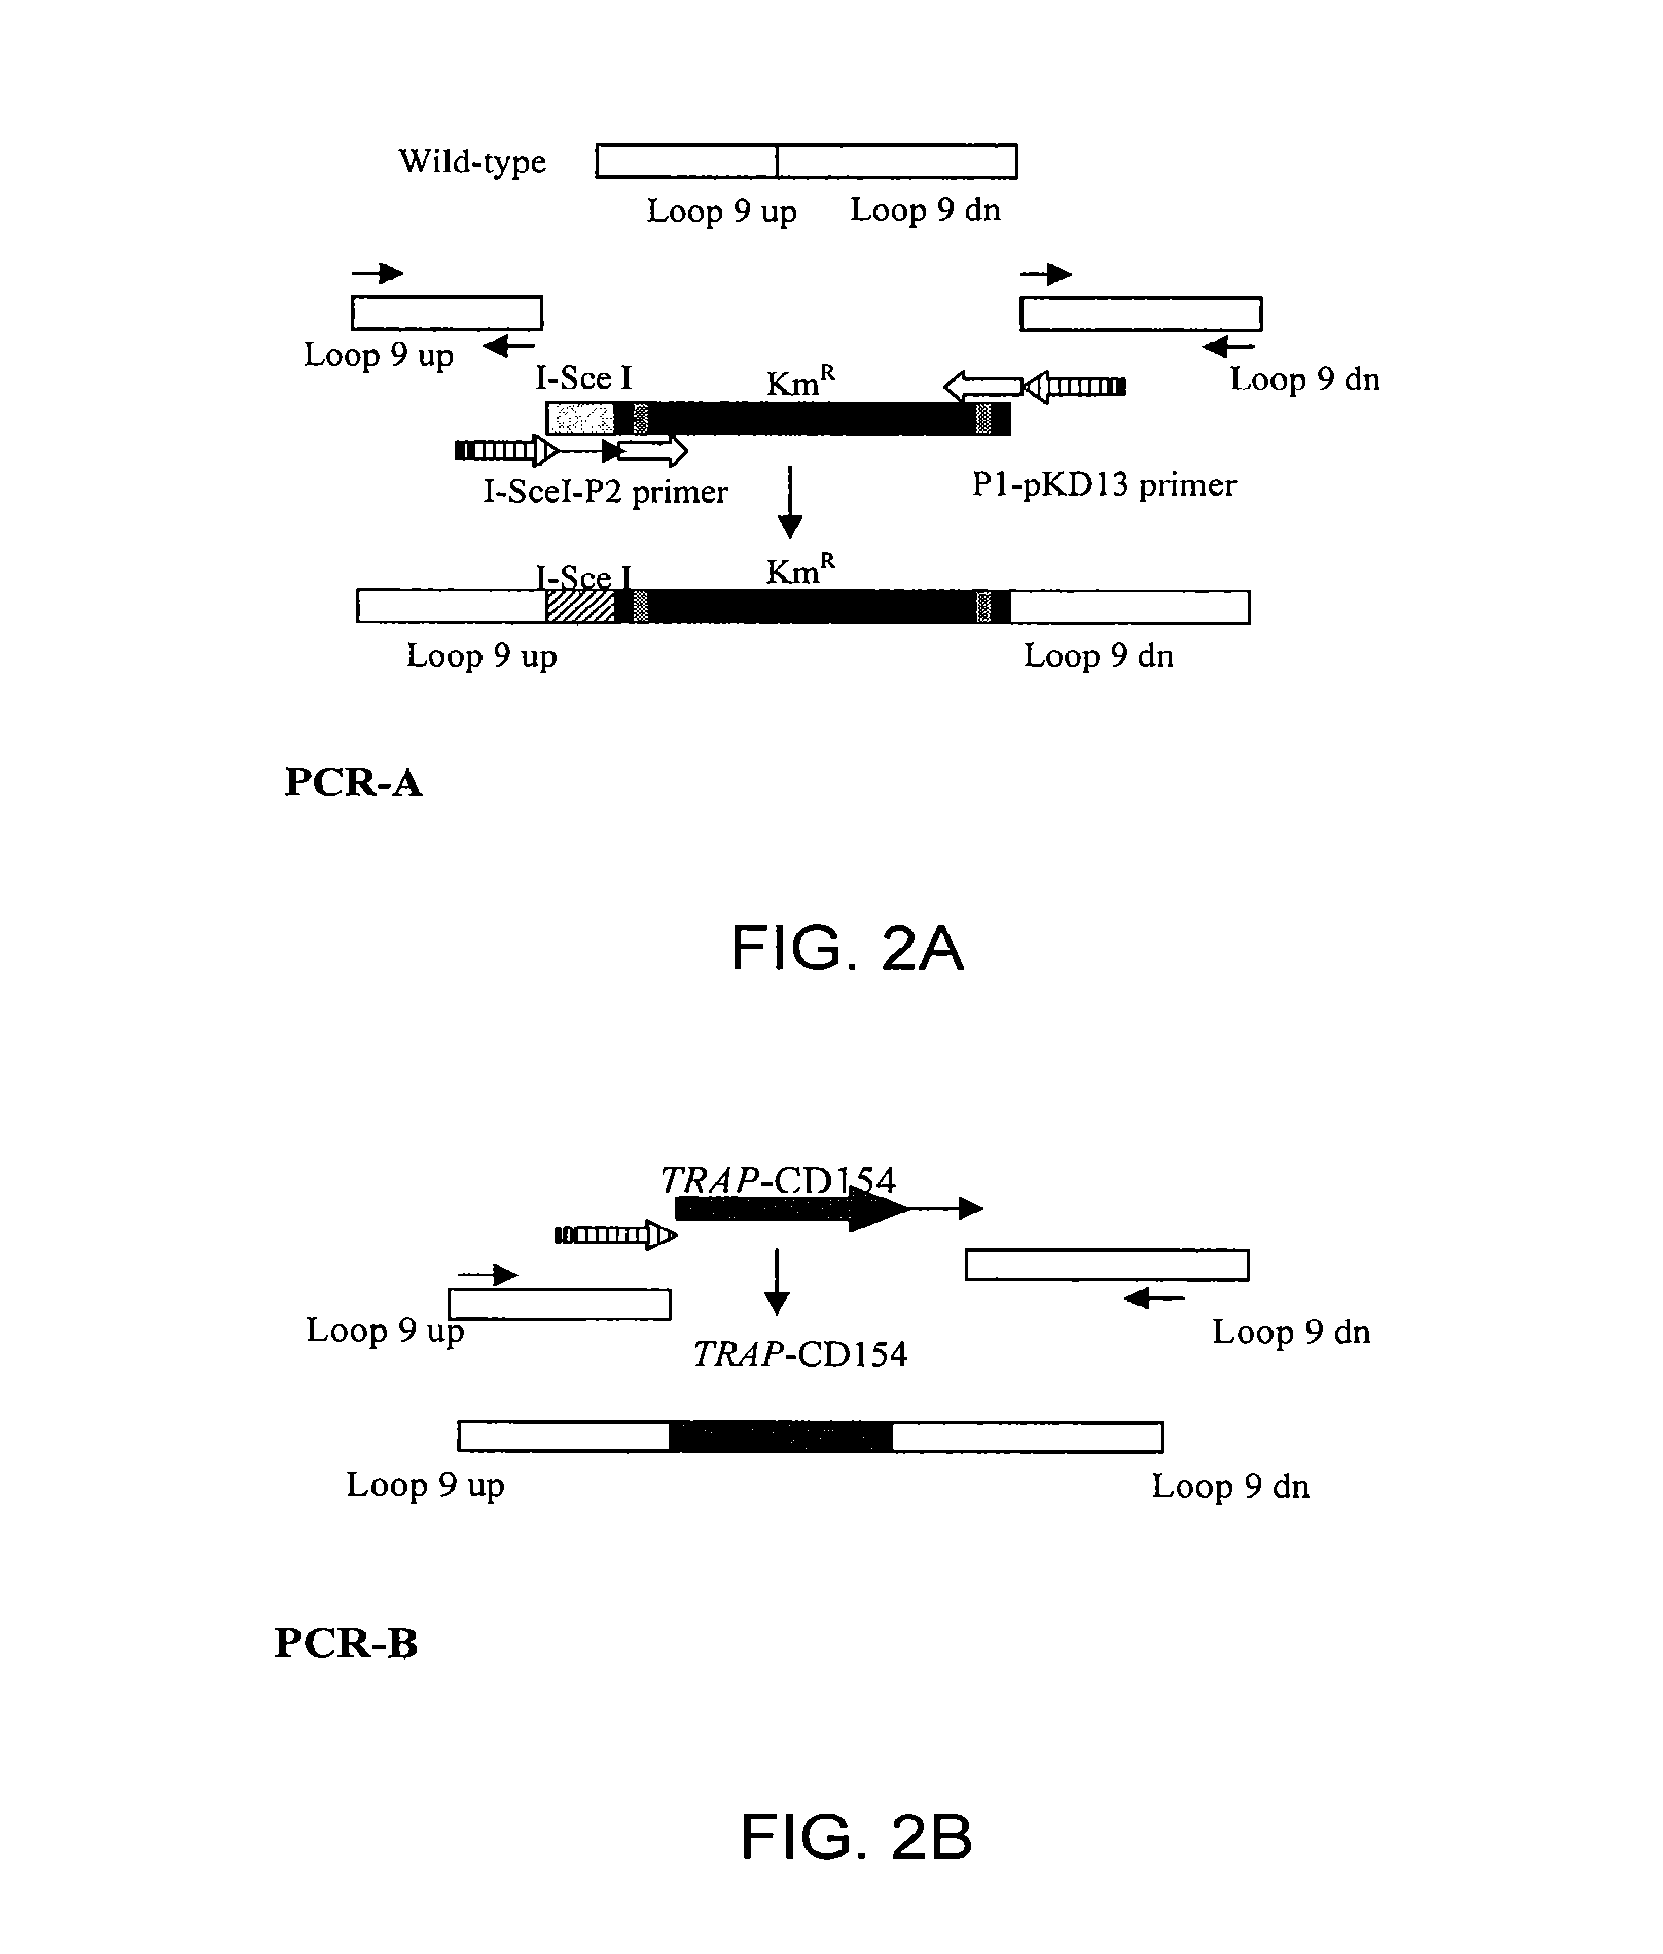 Compositions and methods of enhancing immune responses to eimeria